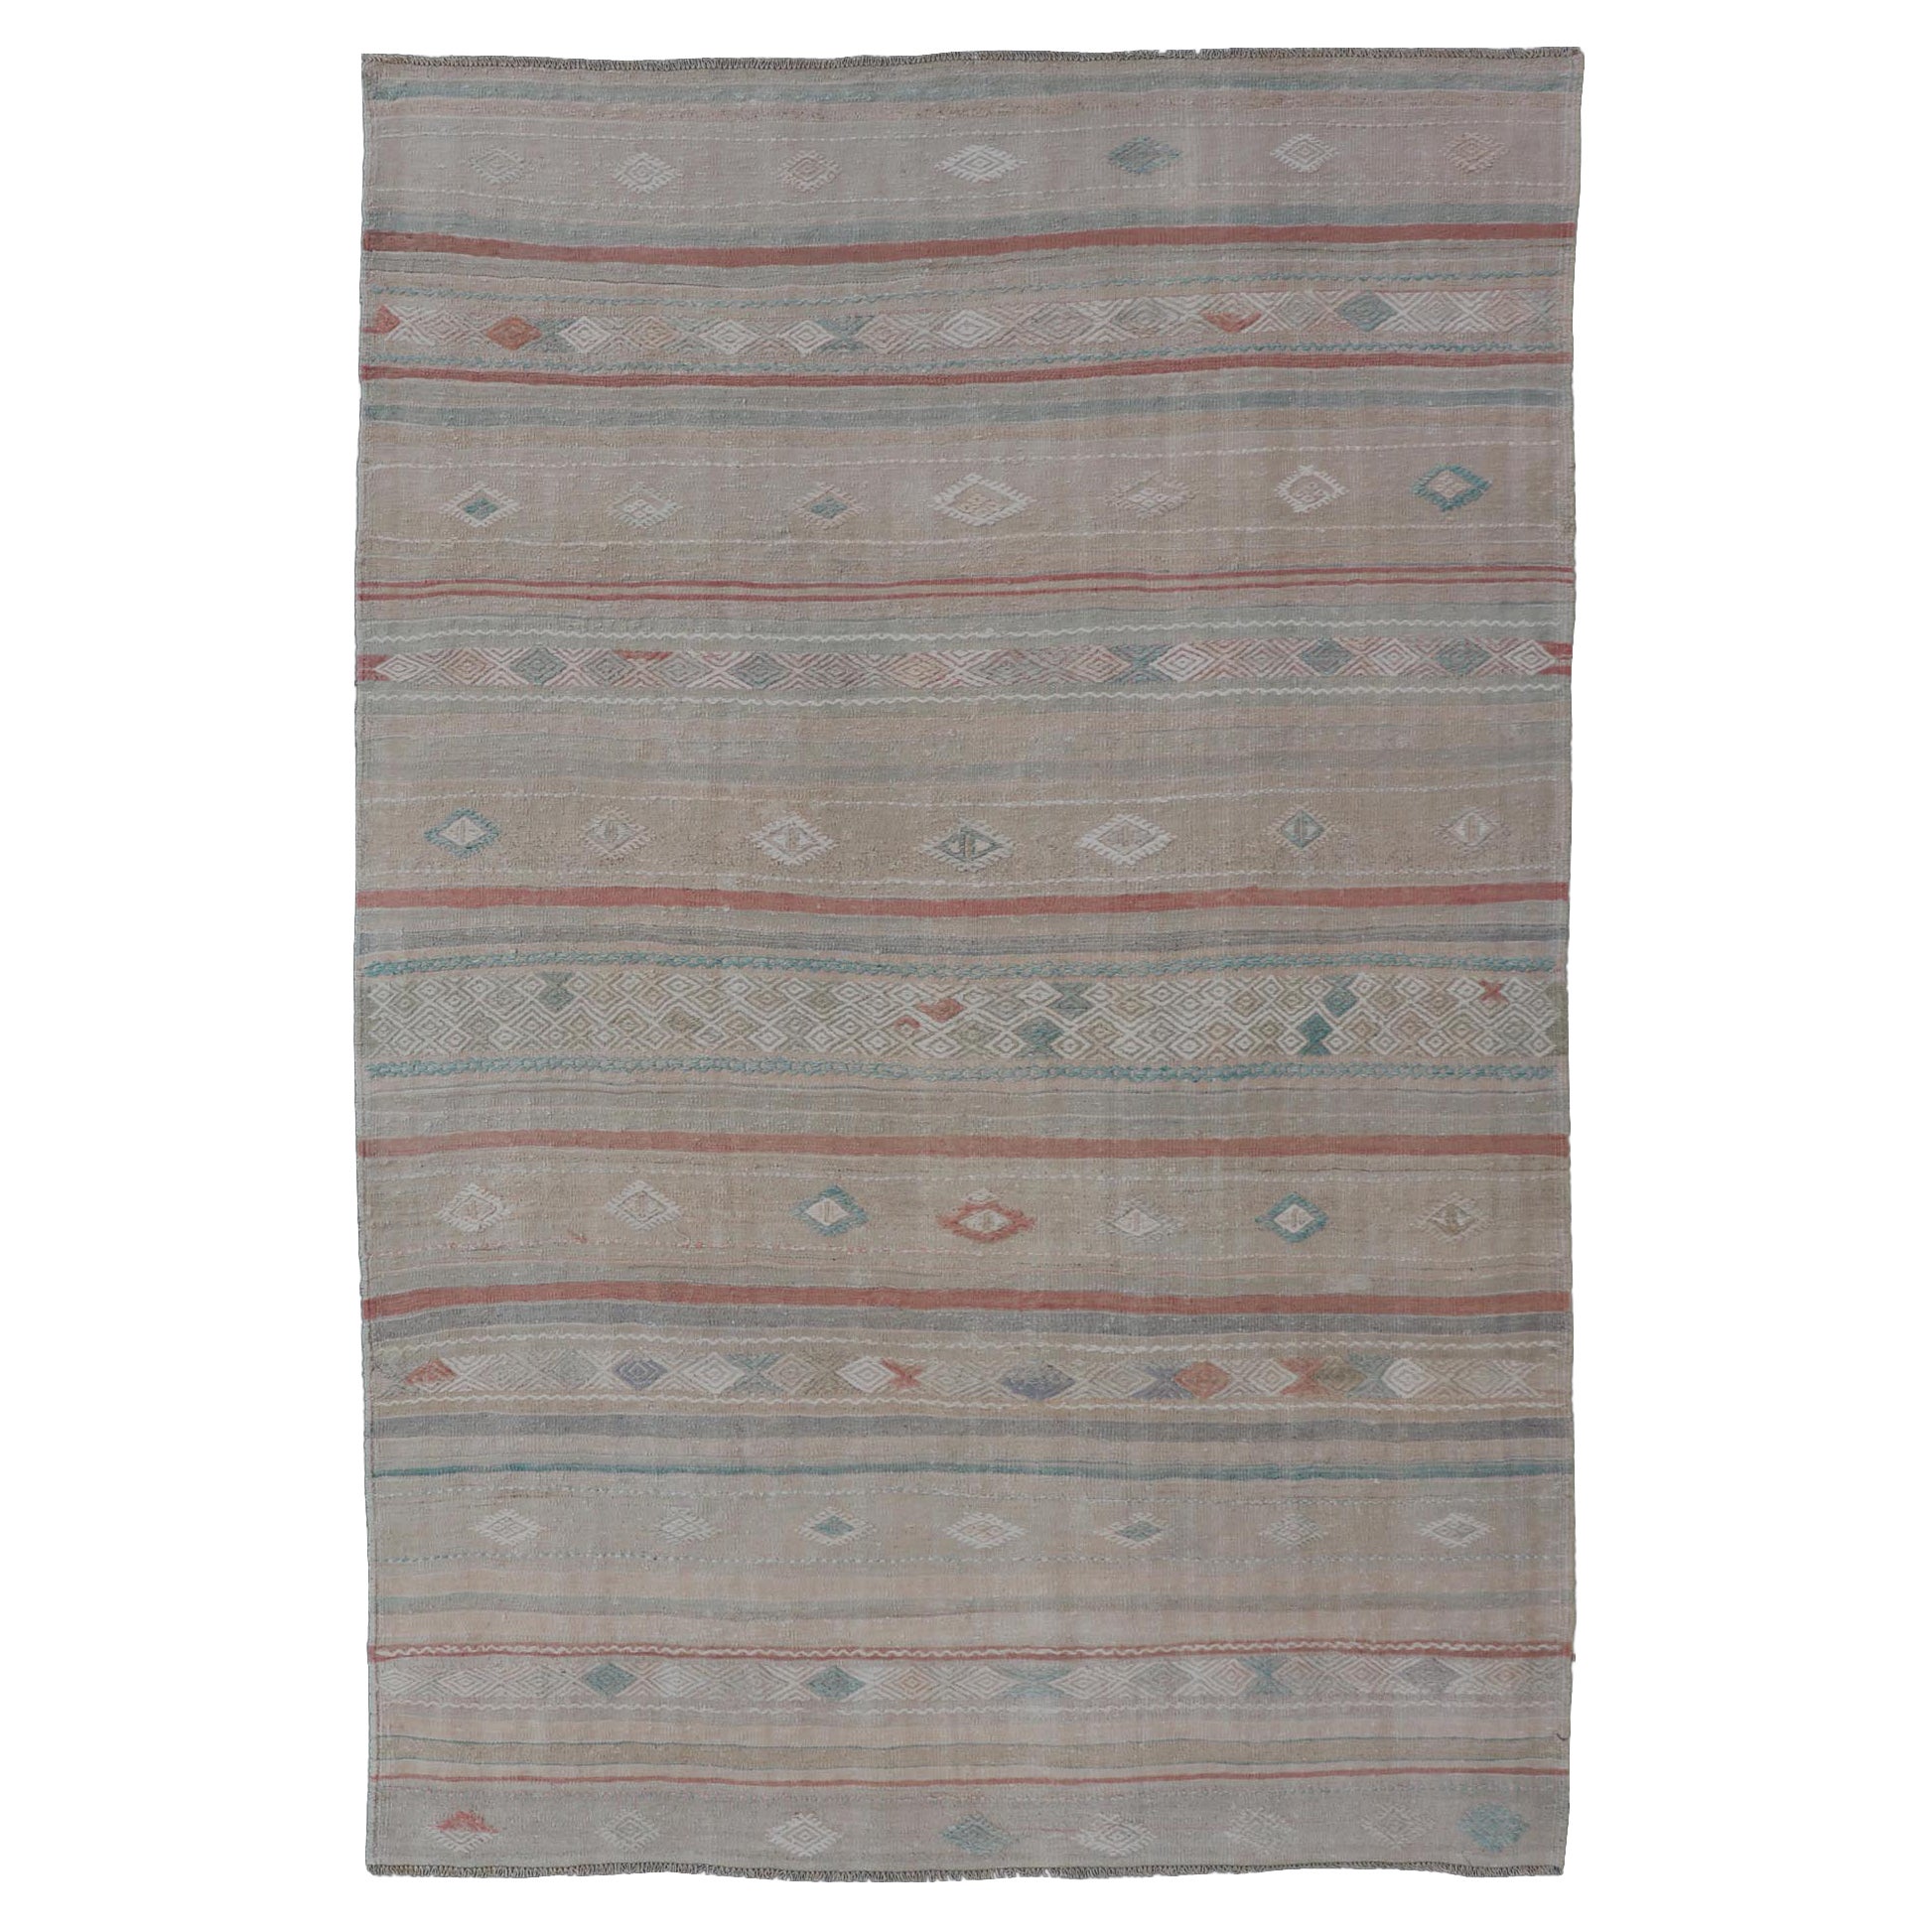 Turkish Flat-Weave Embroideries Kilim in Taupe, Green, Teal, Cream, and Brown For Sale